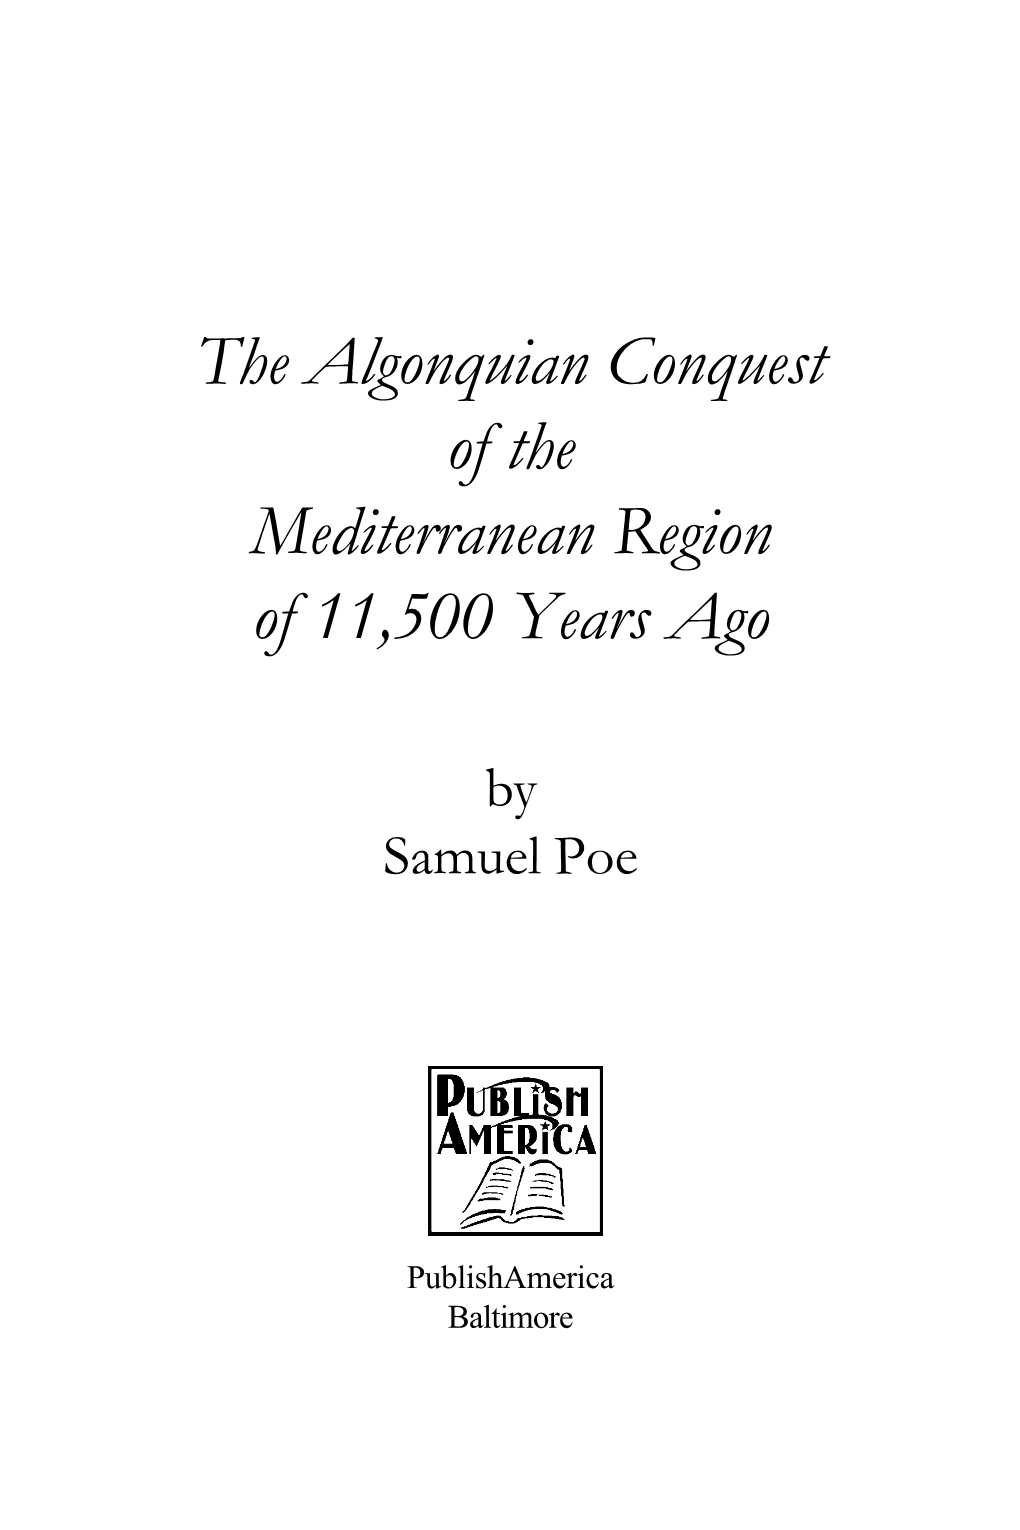 The Algonquian Conquest of the Mediterranean Region of 11,500 Years Ago